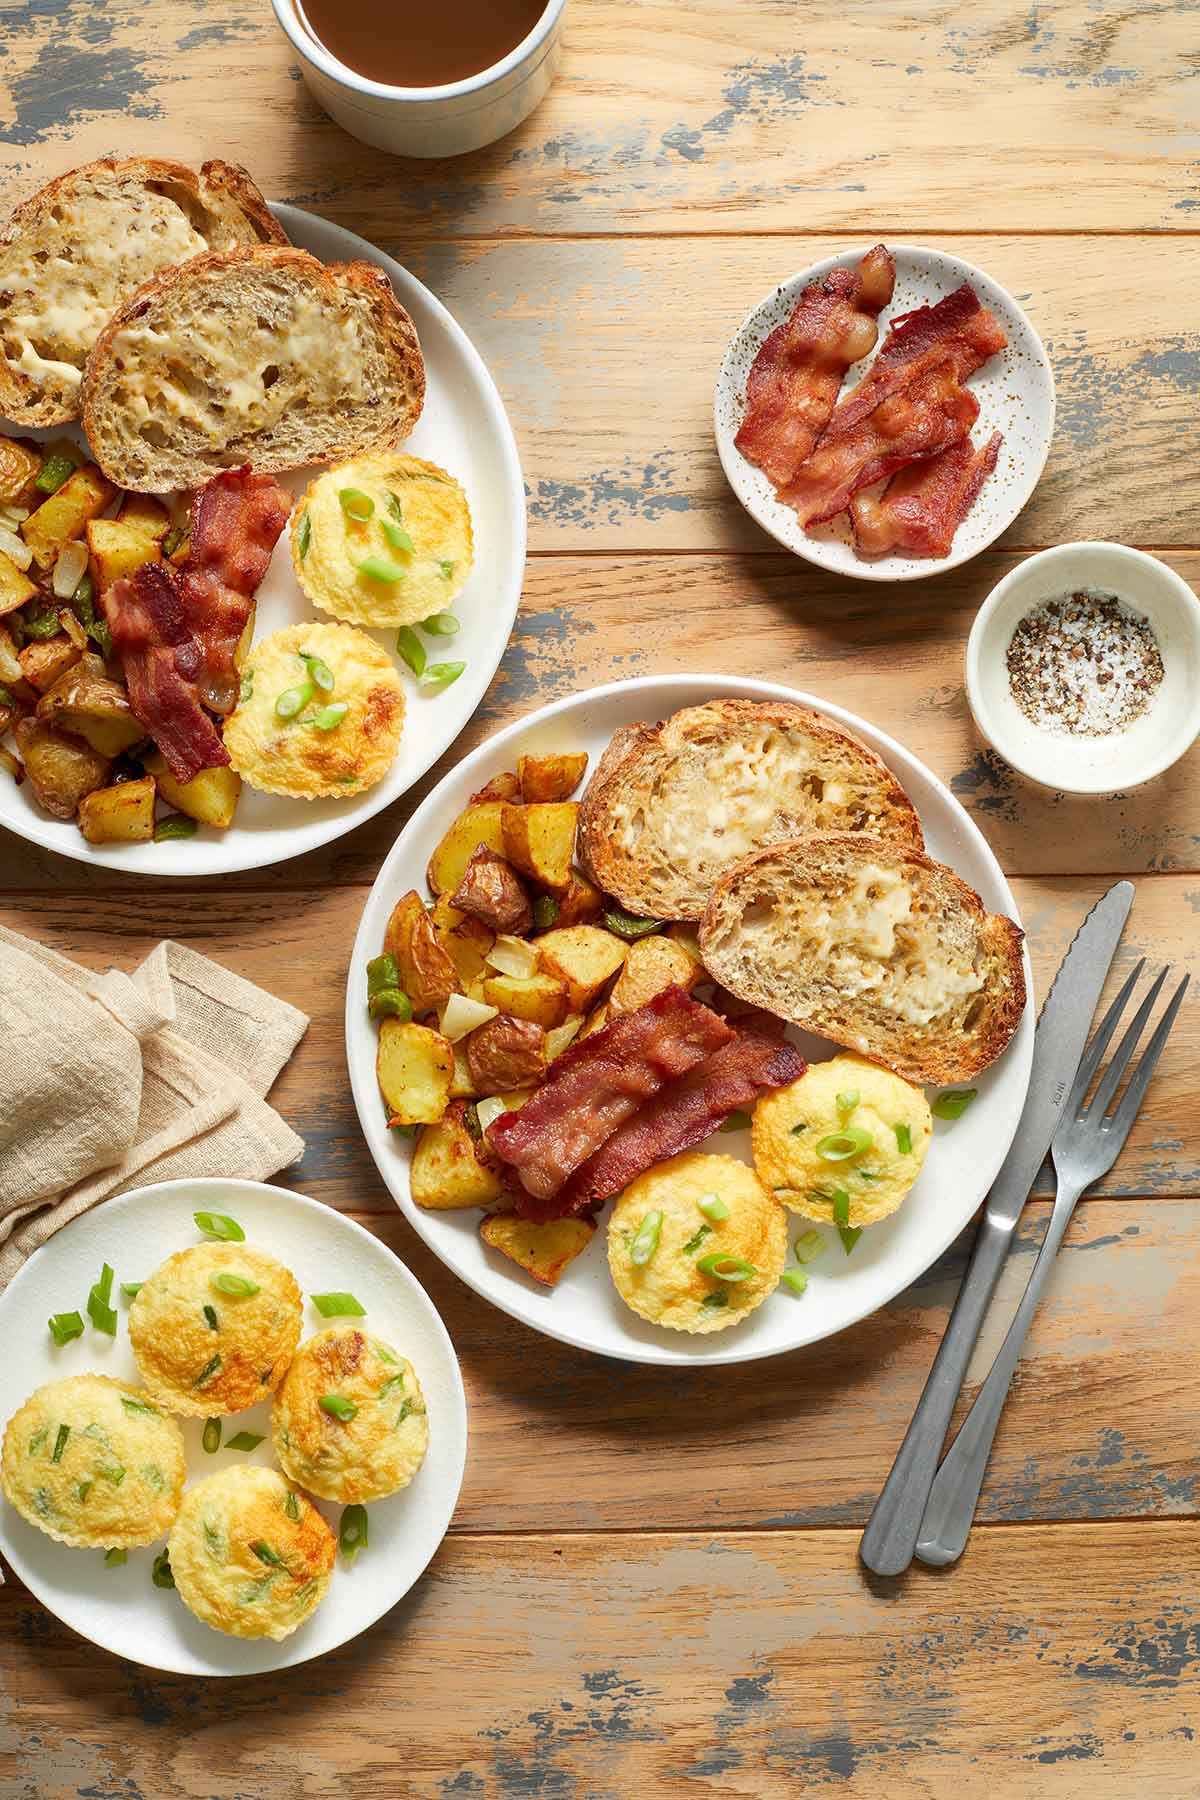 A breakfast setting with plates of egg bites, bacon, home fries and toast on a wooden table.